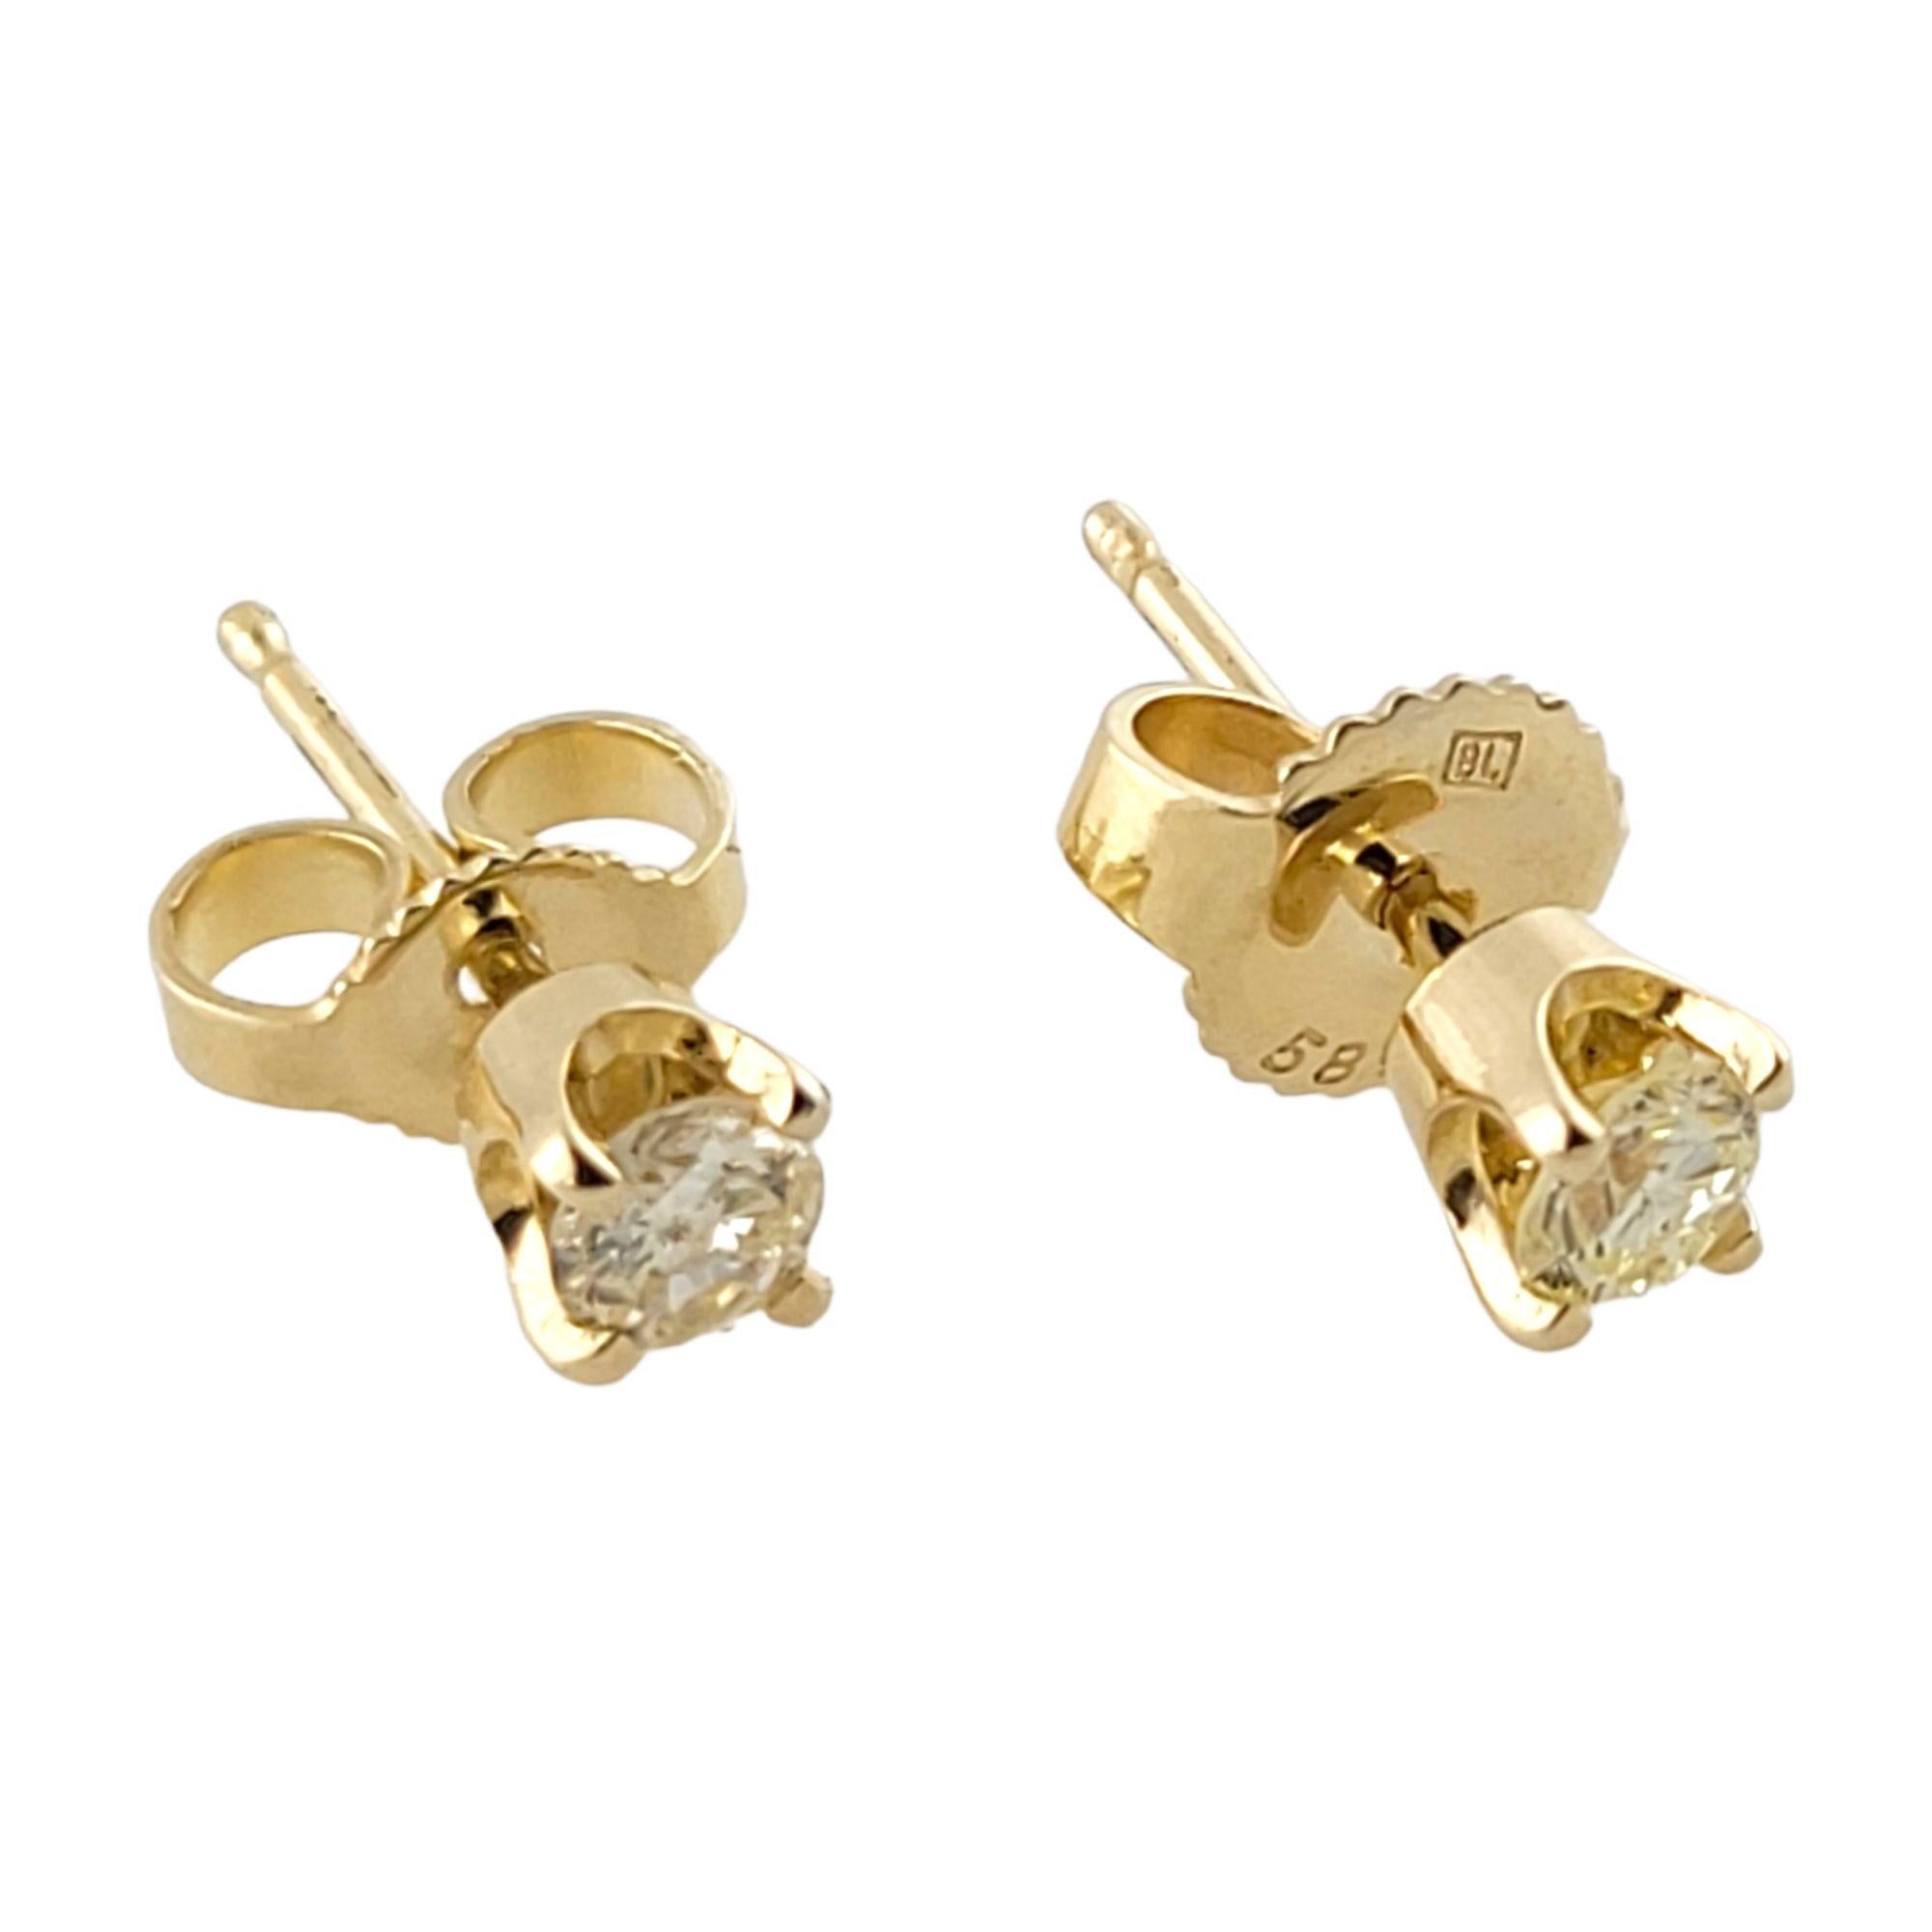 Vintage 14 Karat Yellow Gold Diamond Stud Earrings-

These sparkling stud earrings each feature one round brilliant cut diamond set in 14K yellow gold. Screw back closures.

Approximate total diamond weight: .29 ct.

Diamond clarity: I1

Diamond